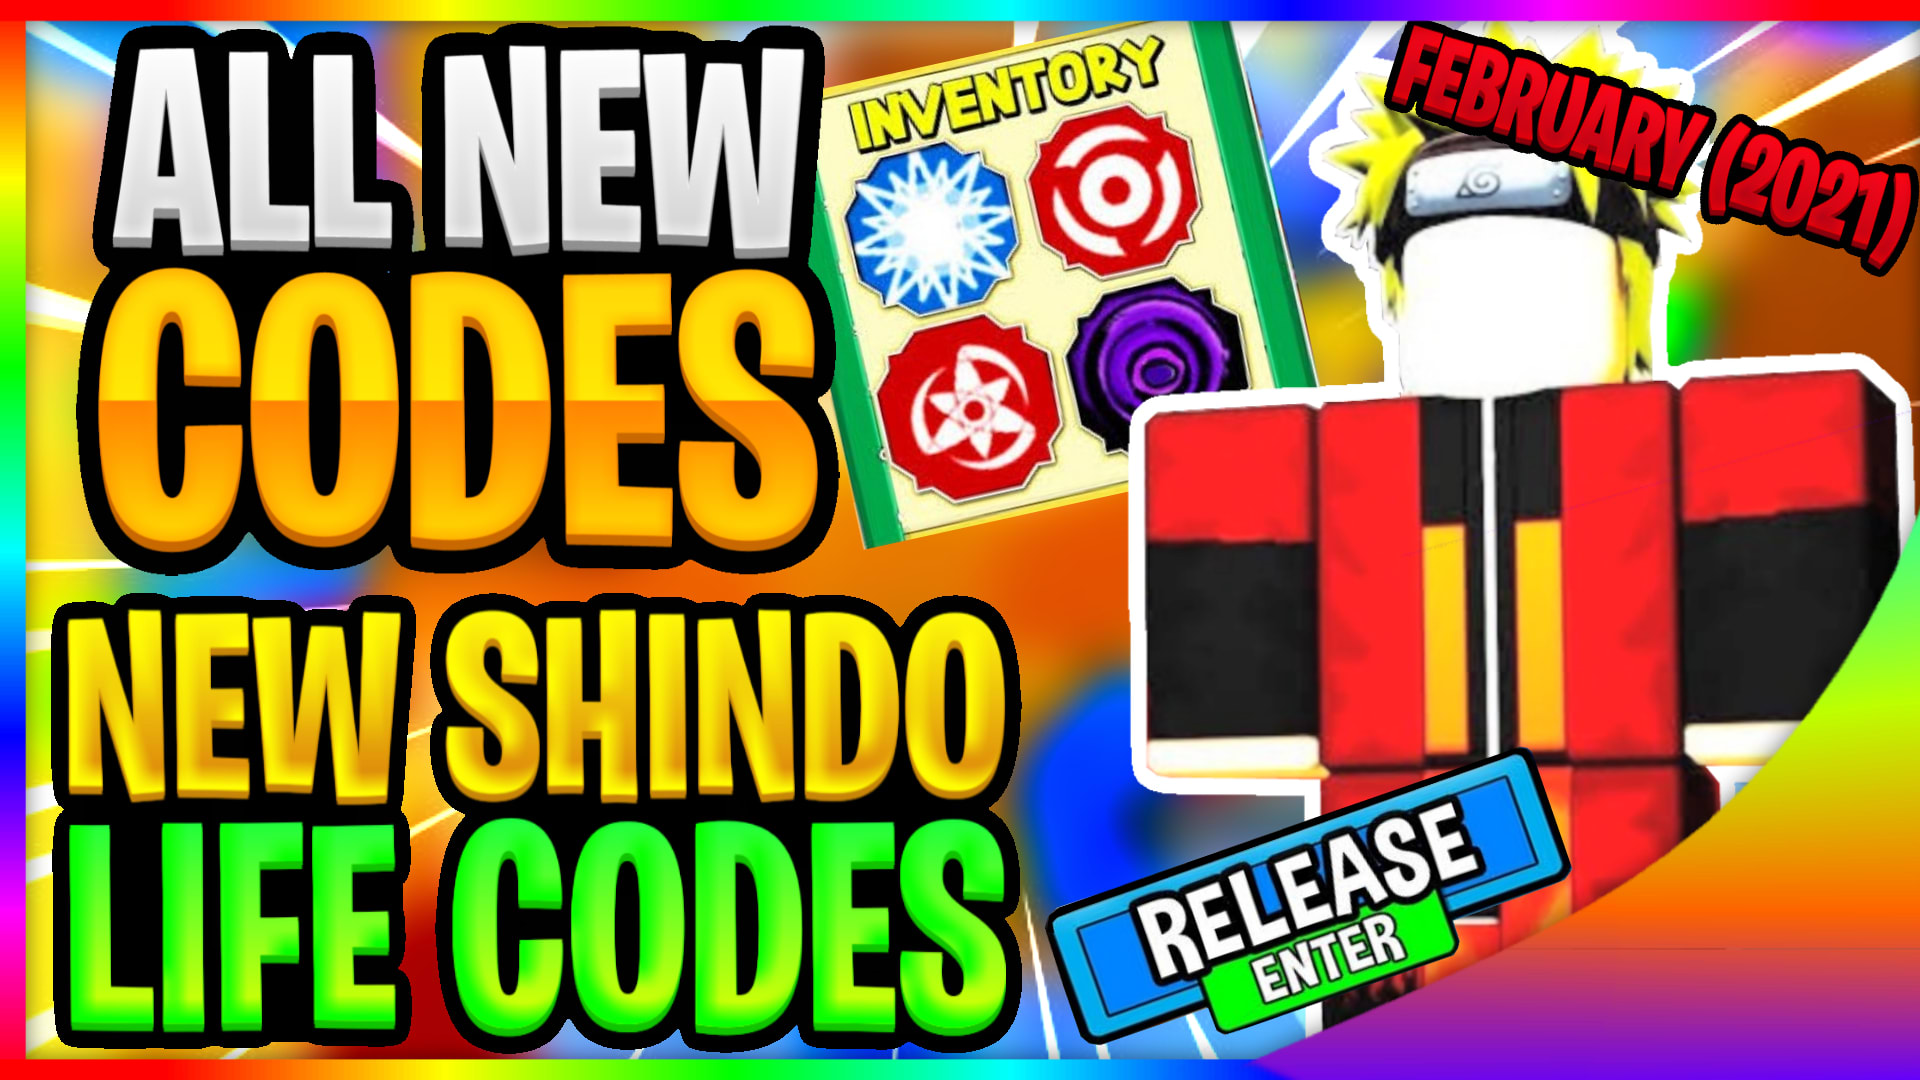 The Best Shindo Life Codes [February 2021]